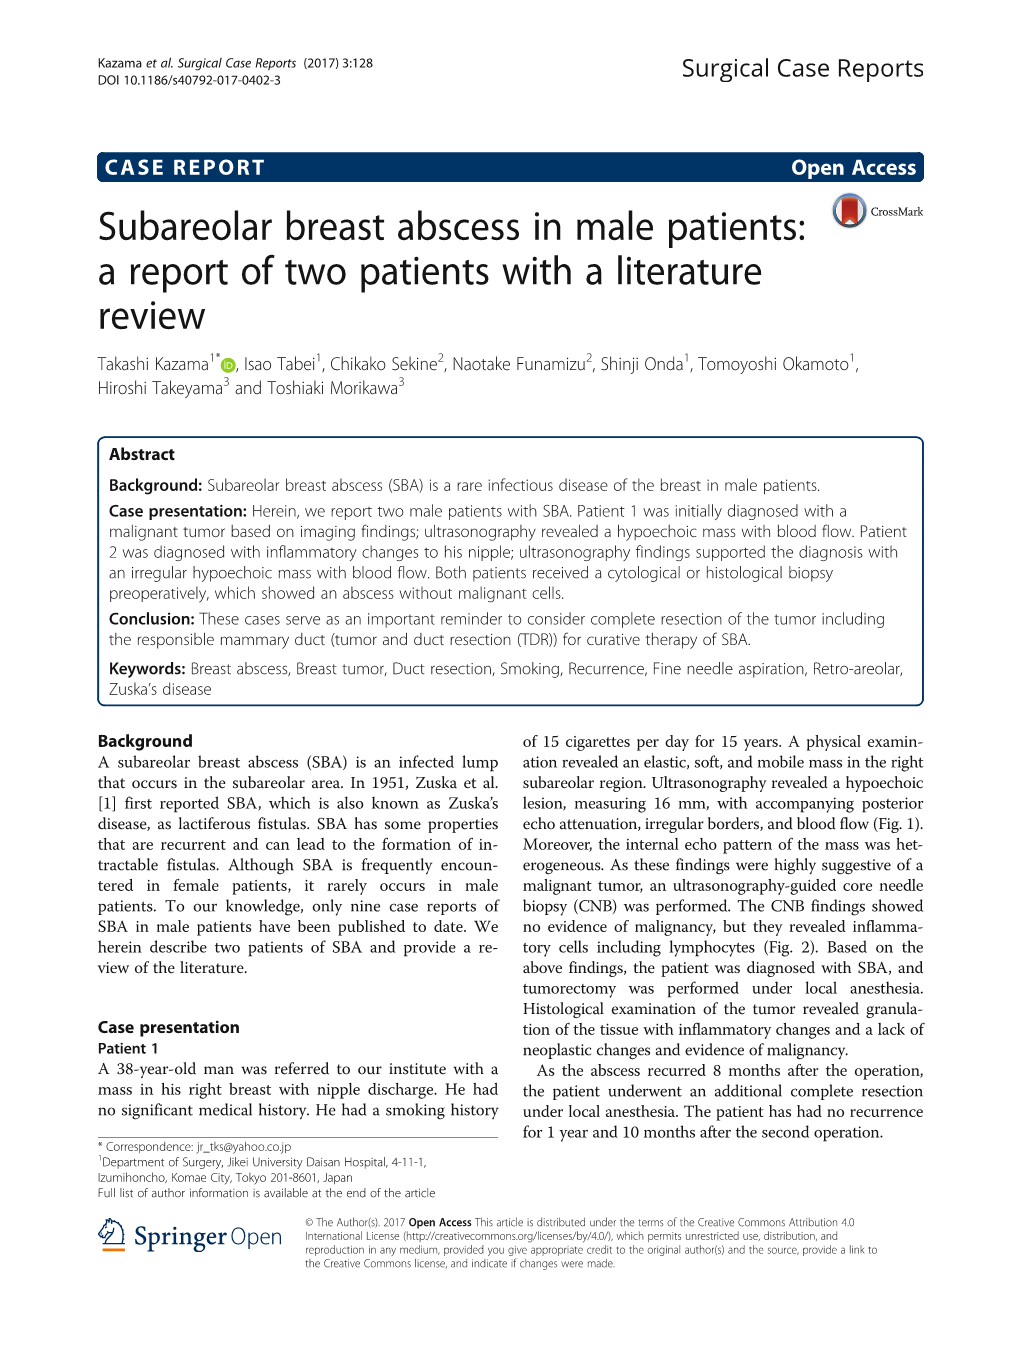 Subareolar Breast Abscess in Male Patients